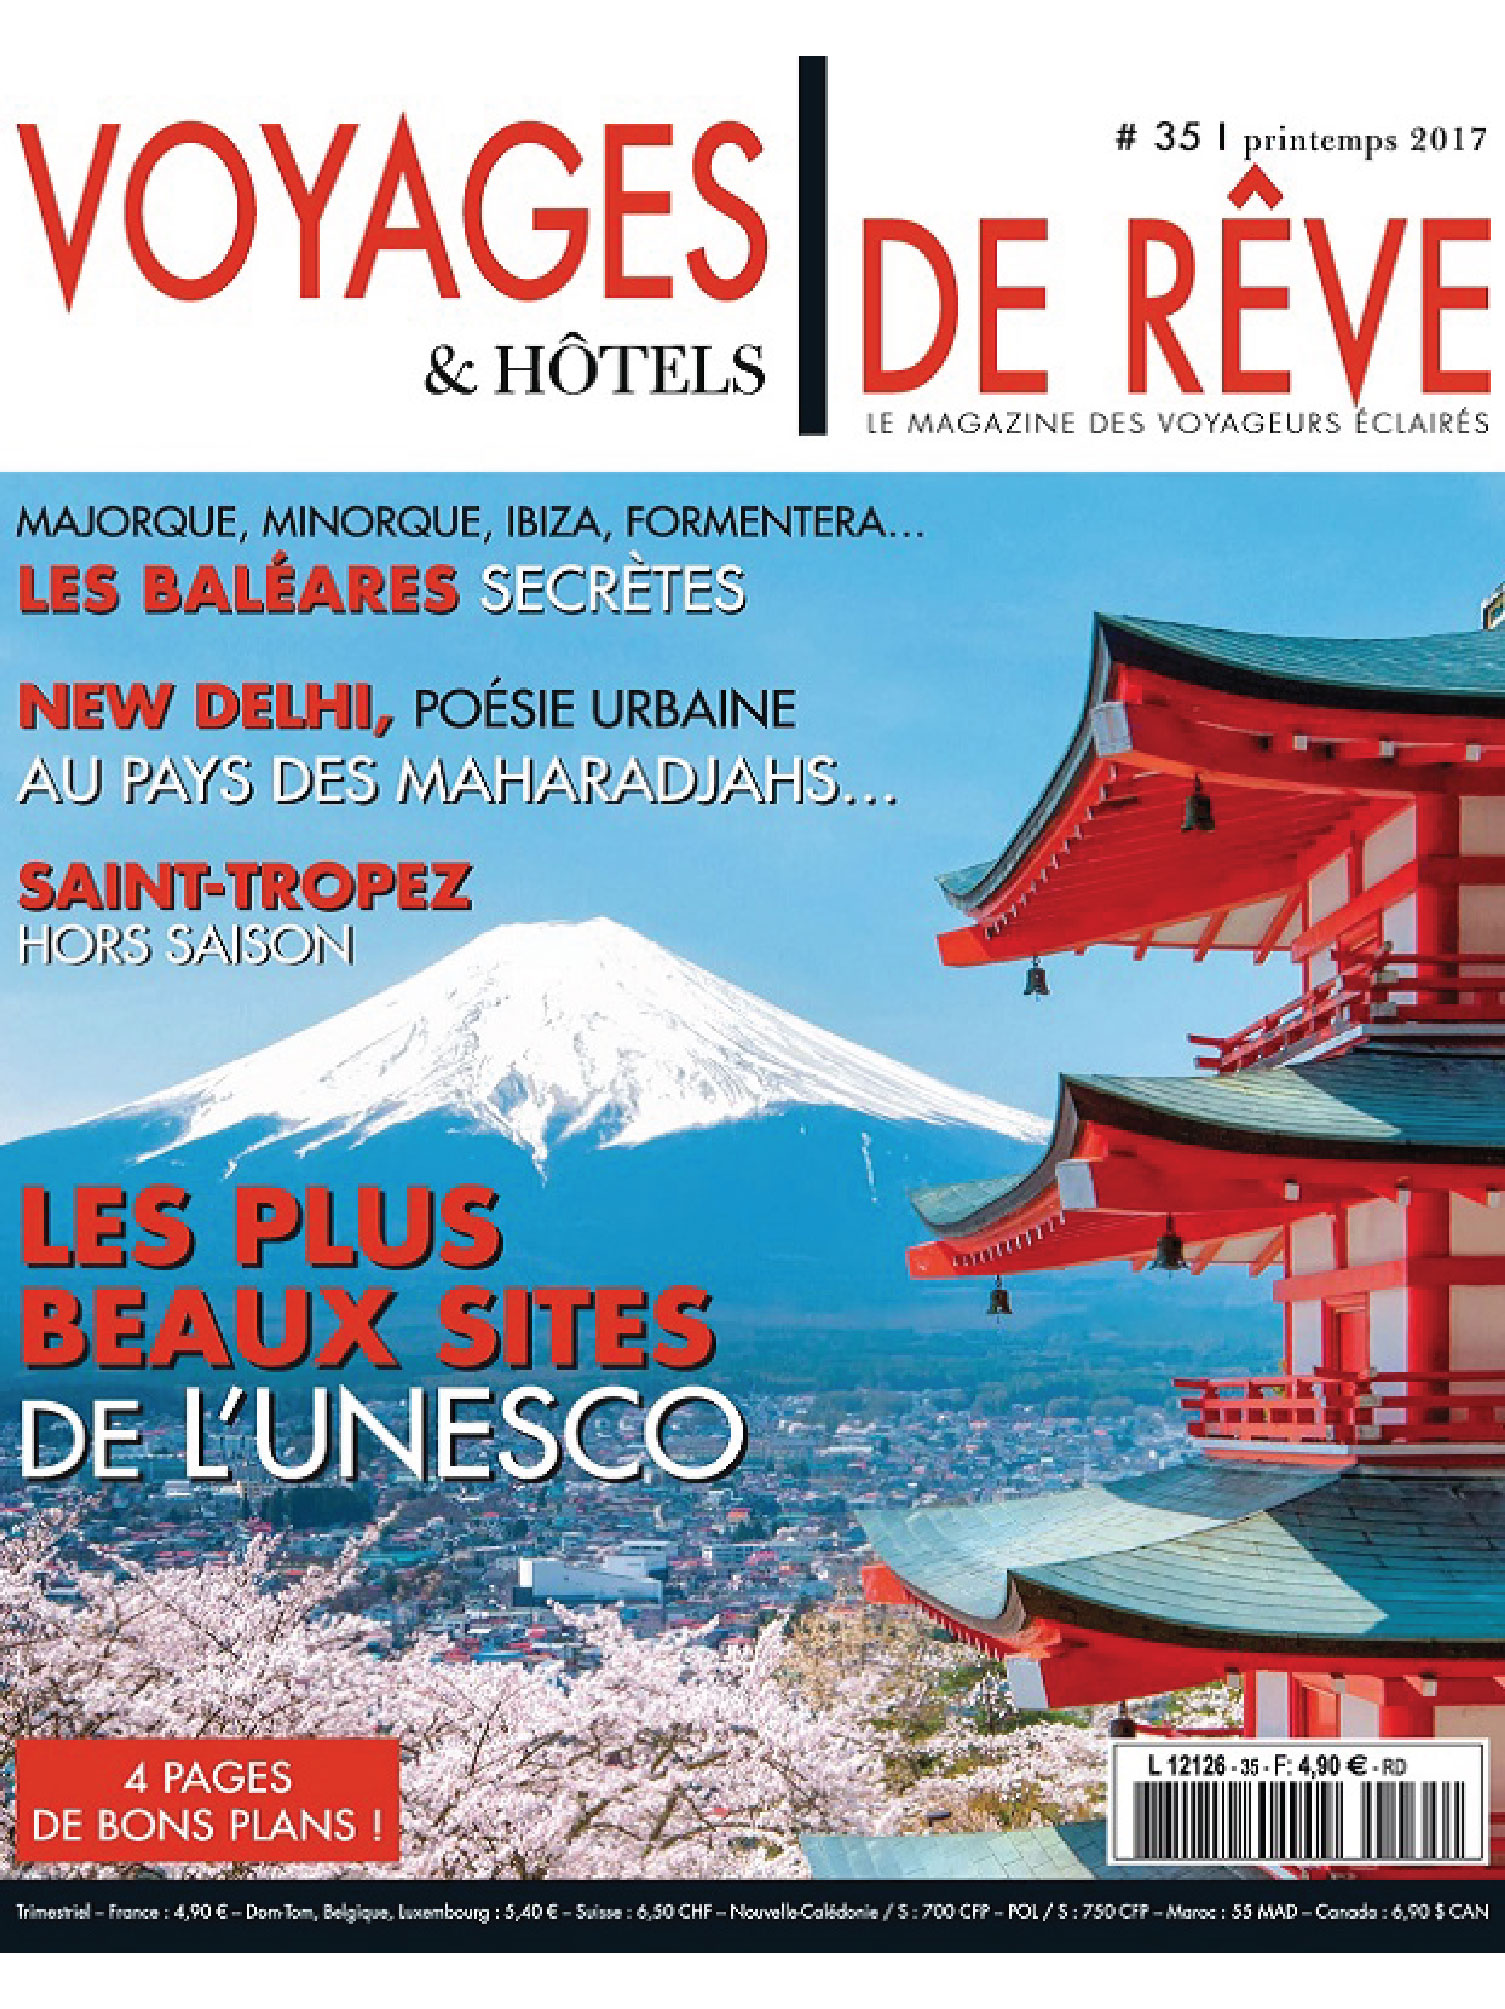 cover of the magazine voyage de reve march 2017